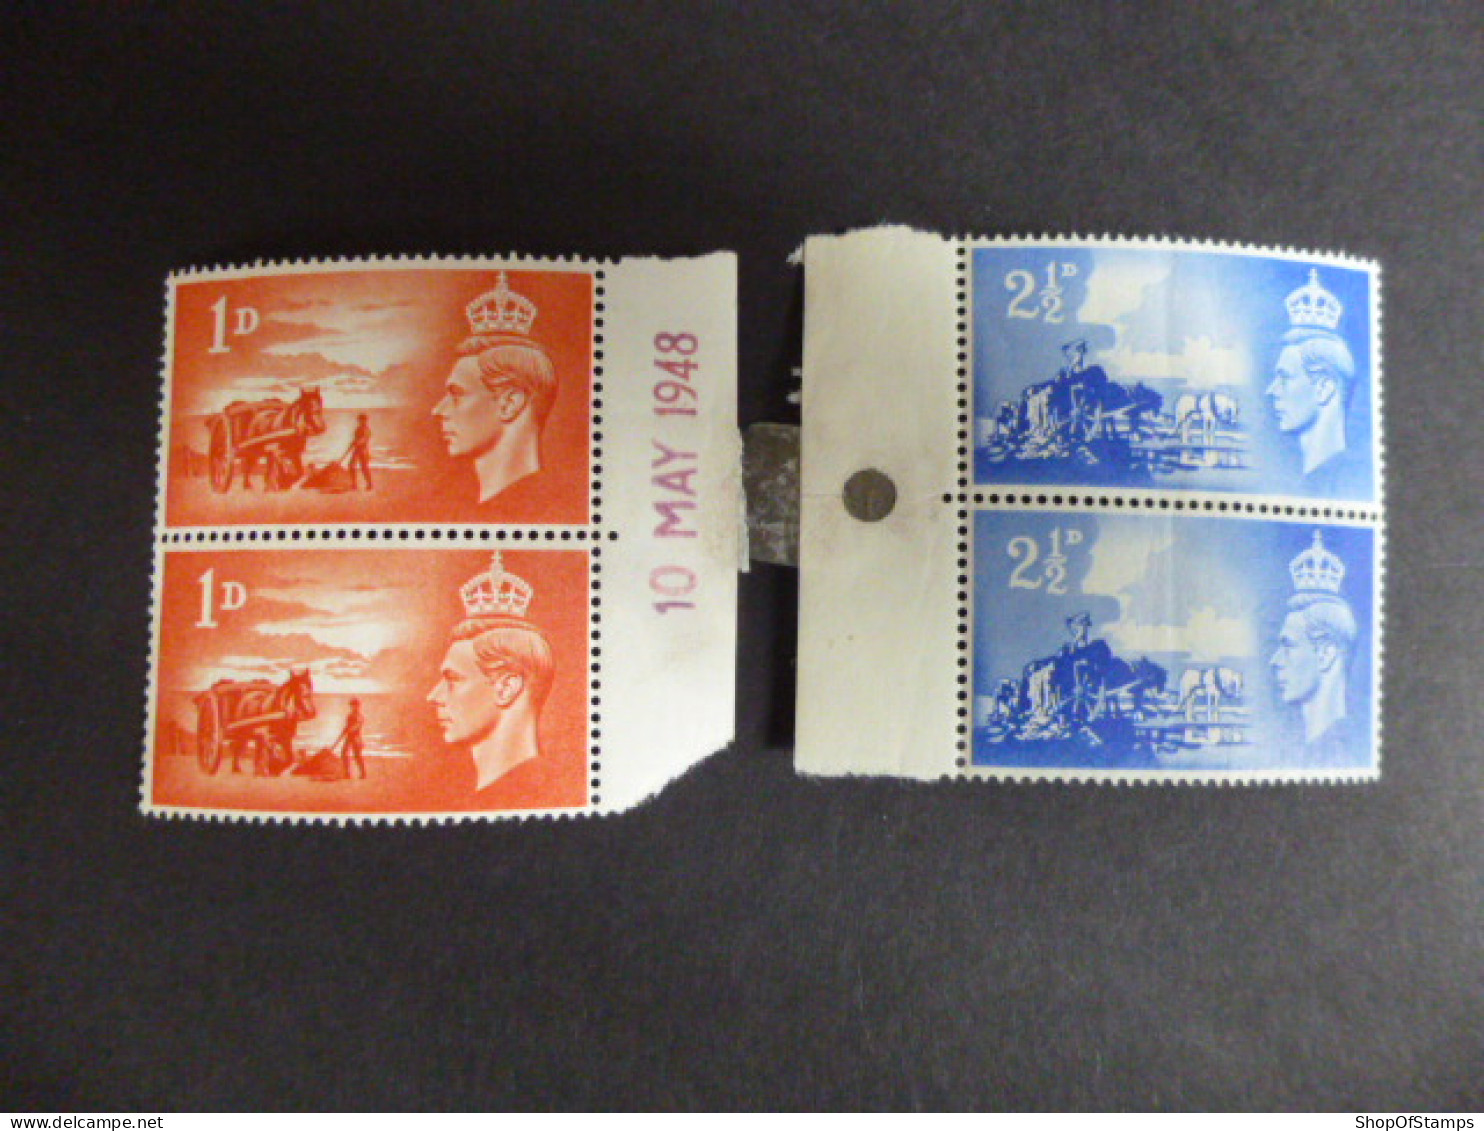 CHANNEL ISLANDS 01-02 MINT PAIR WITH ISSUE DATE STAMP - Ohne Zuordnung